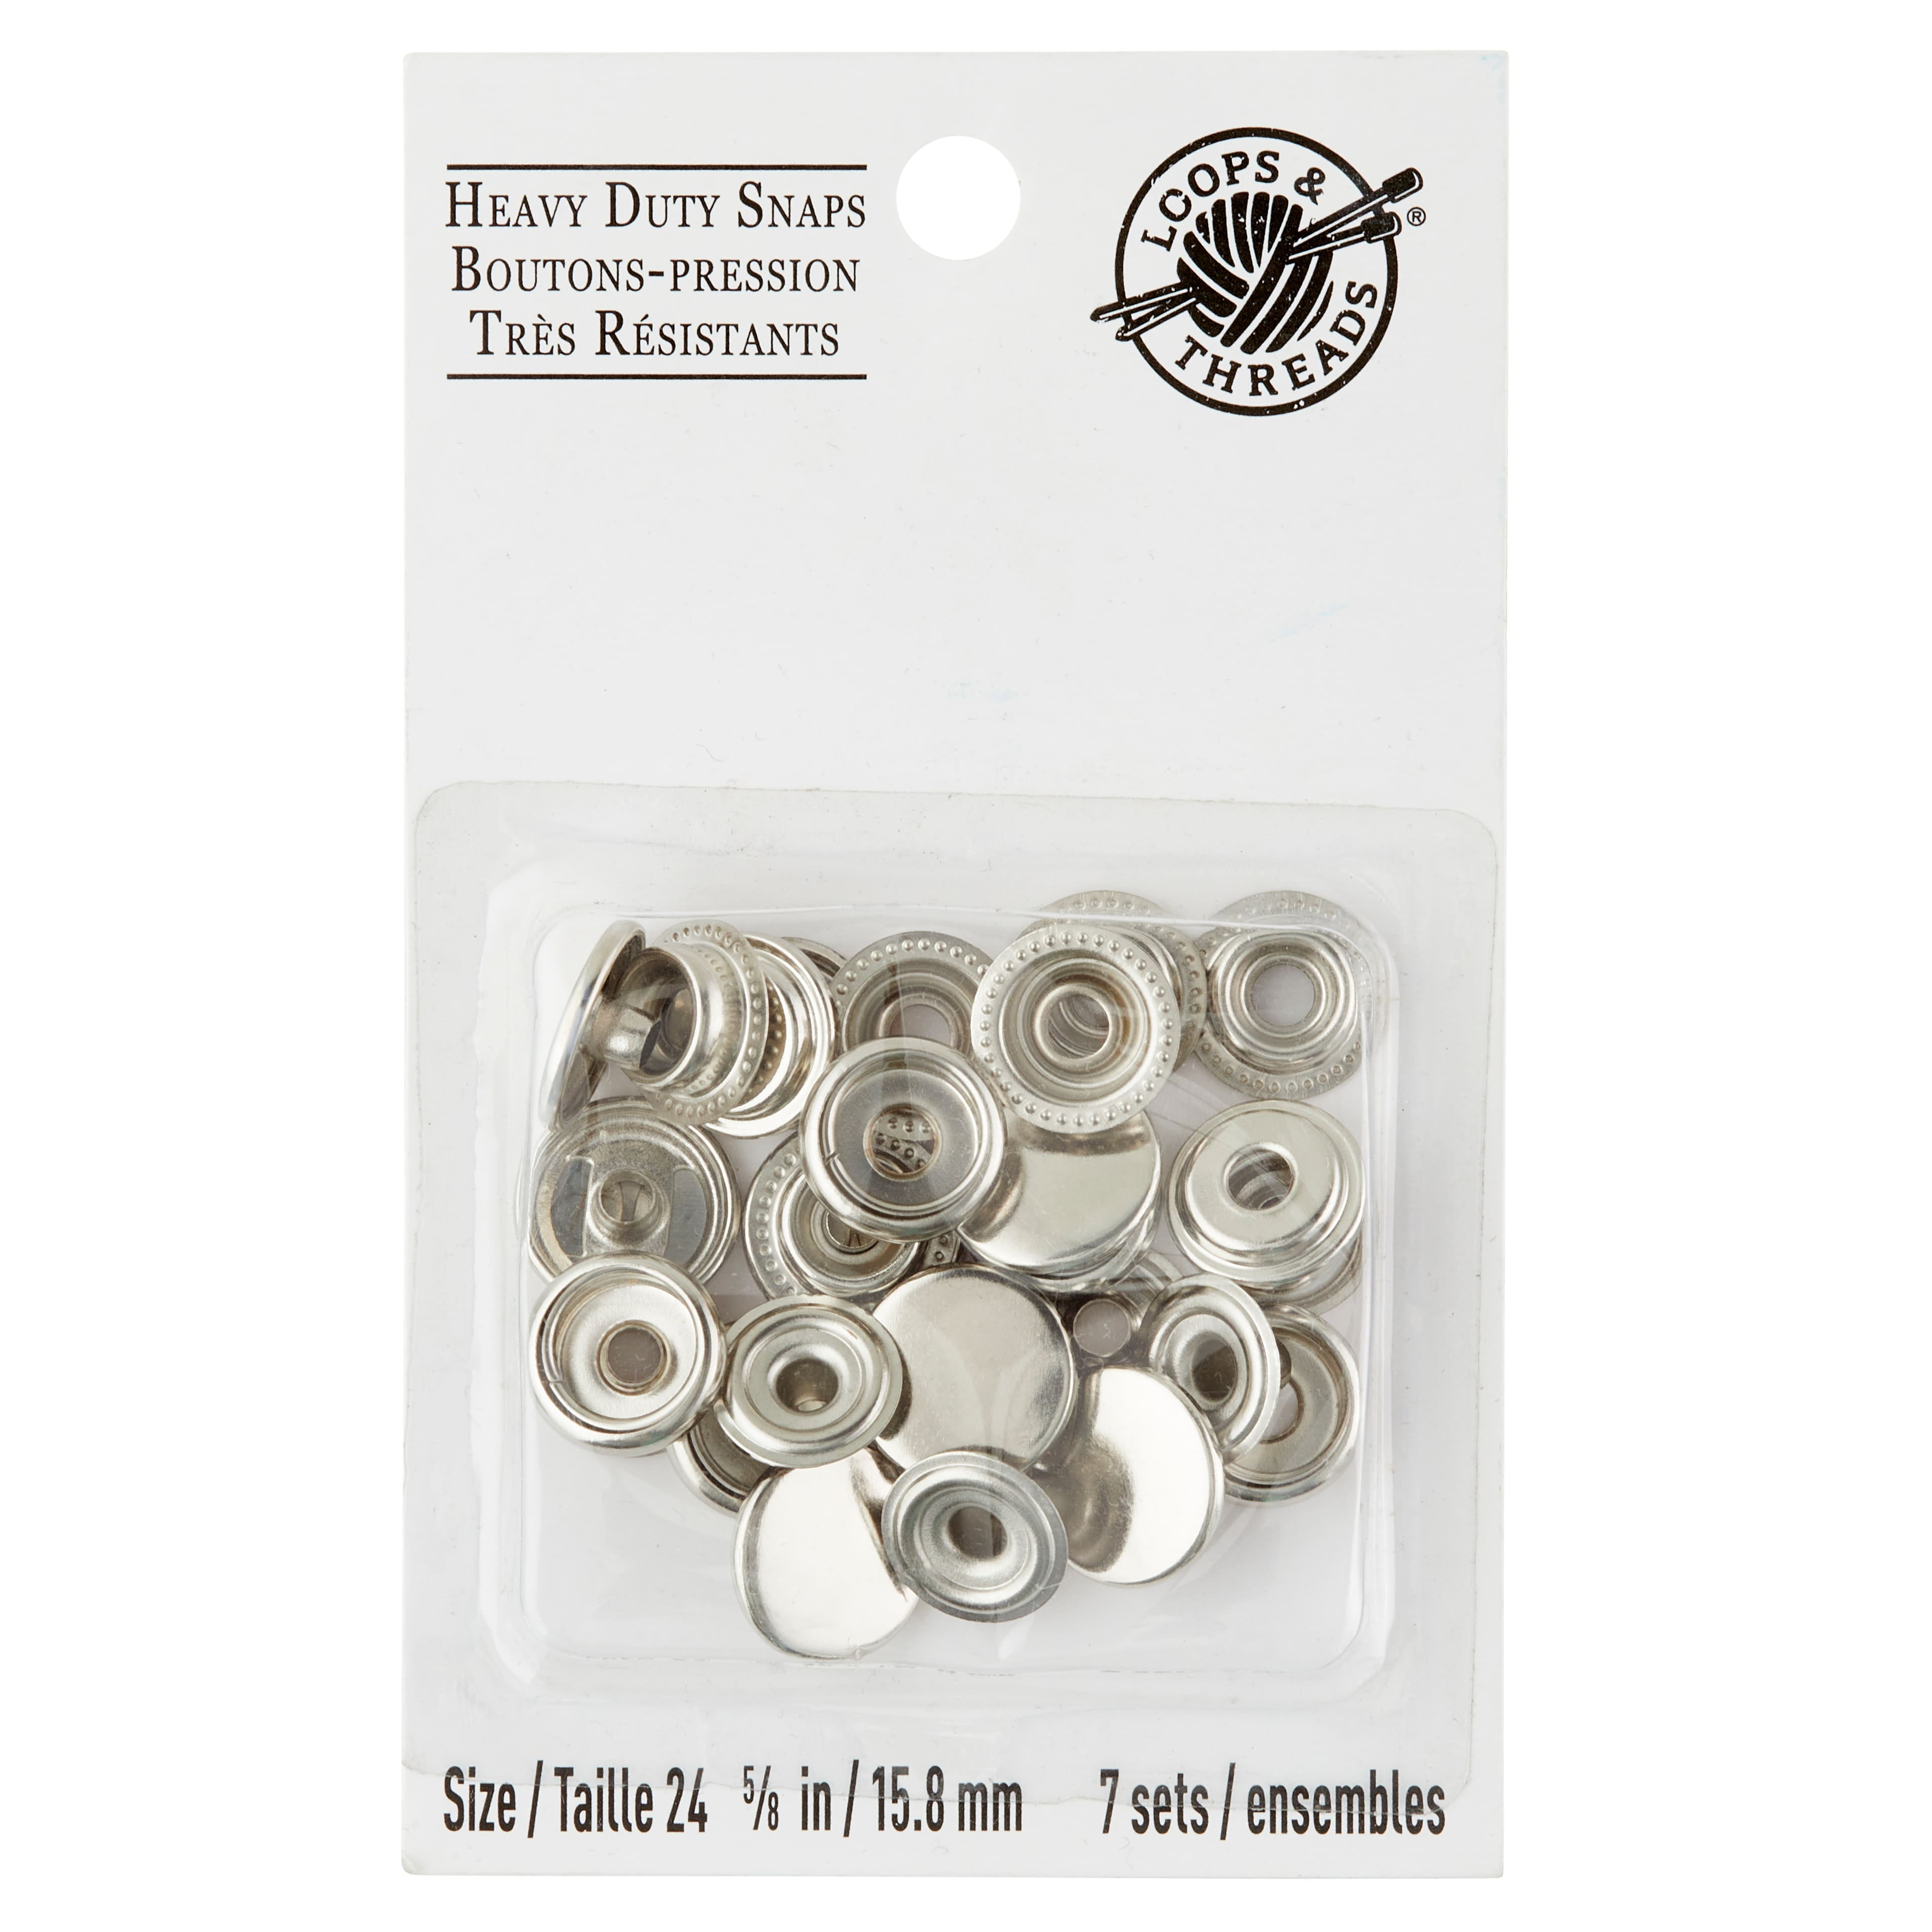 12 Packs: 7 ct. (84 total) Silver Heavy Duty Snaps by Loops & Threads™